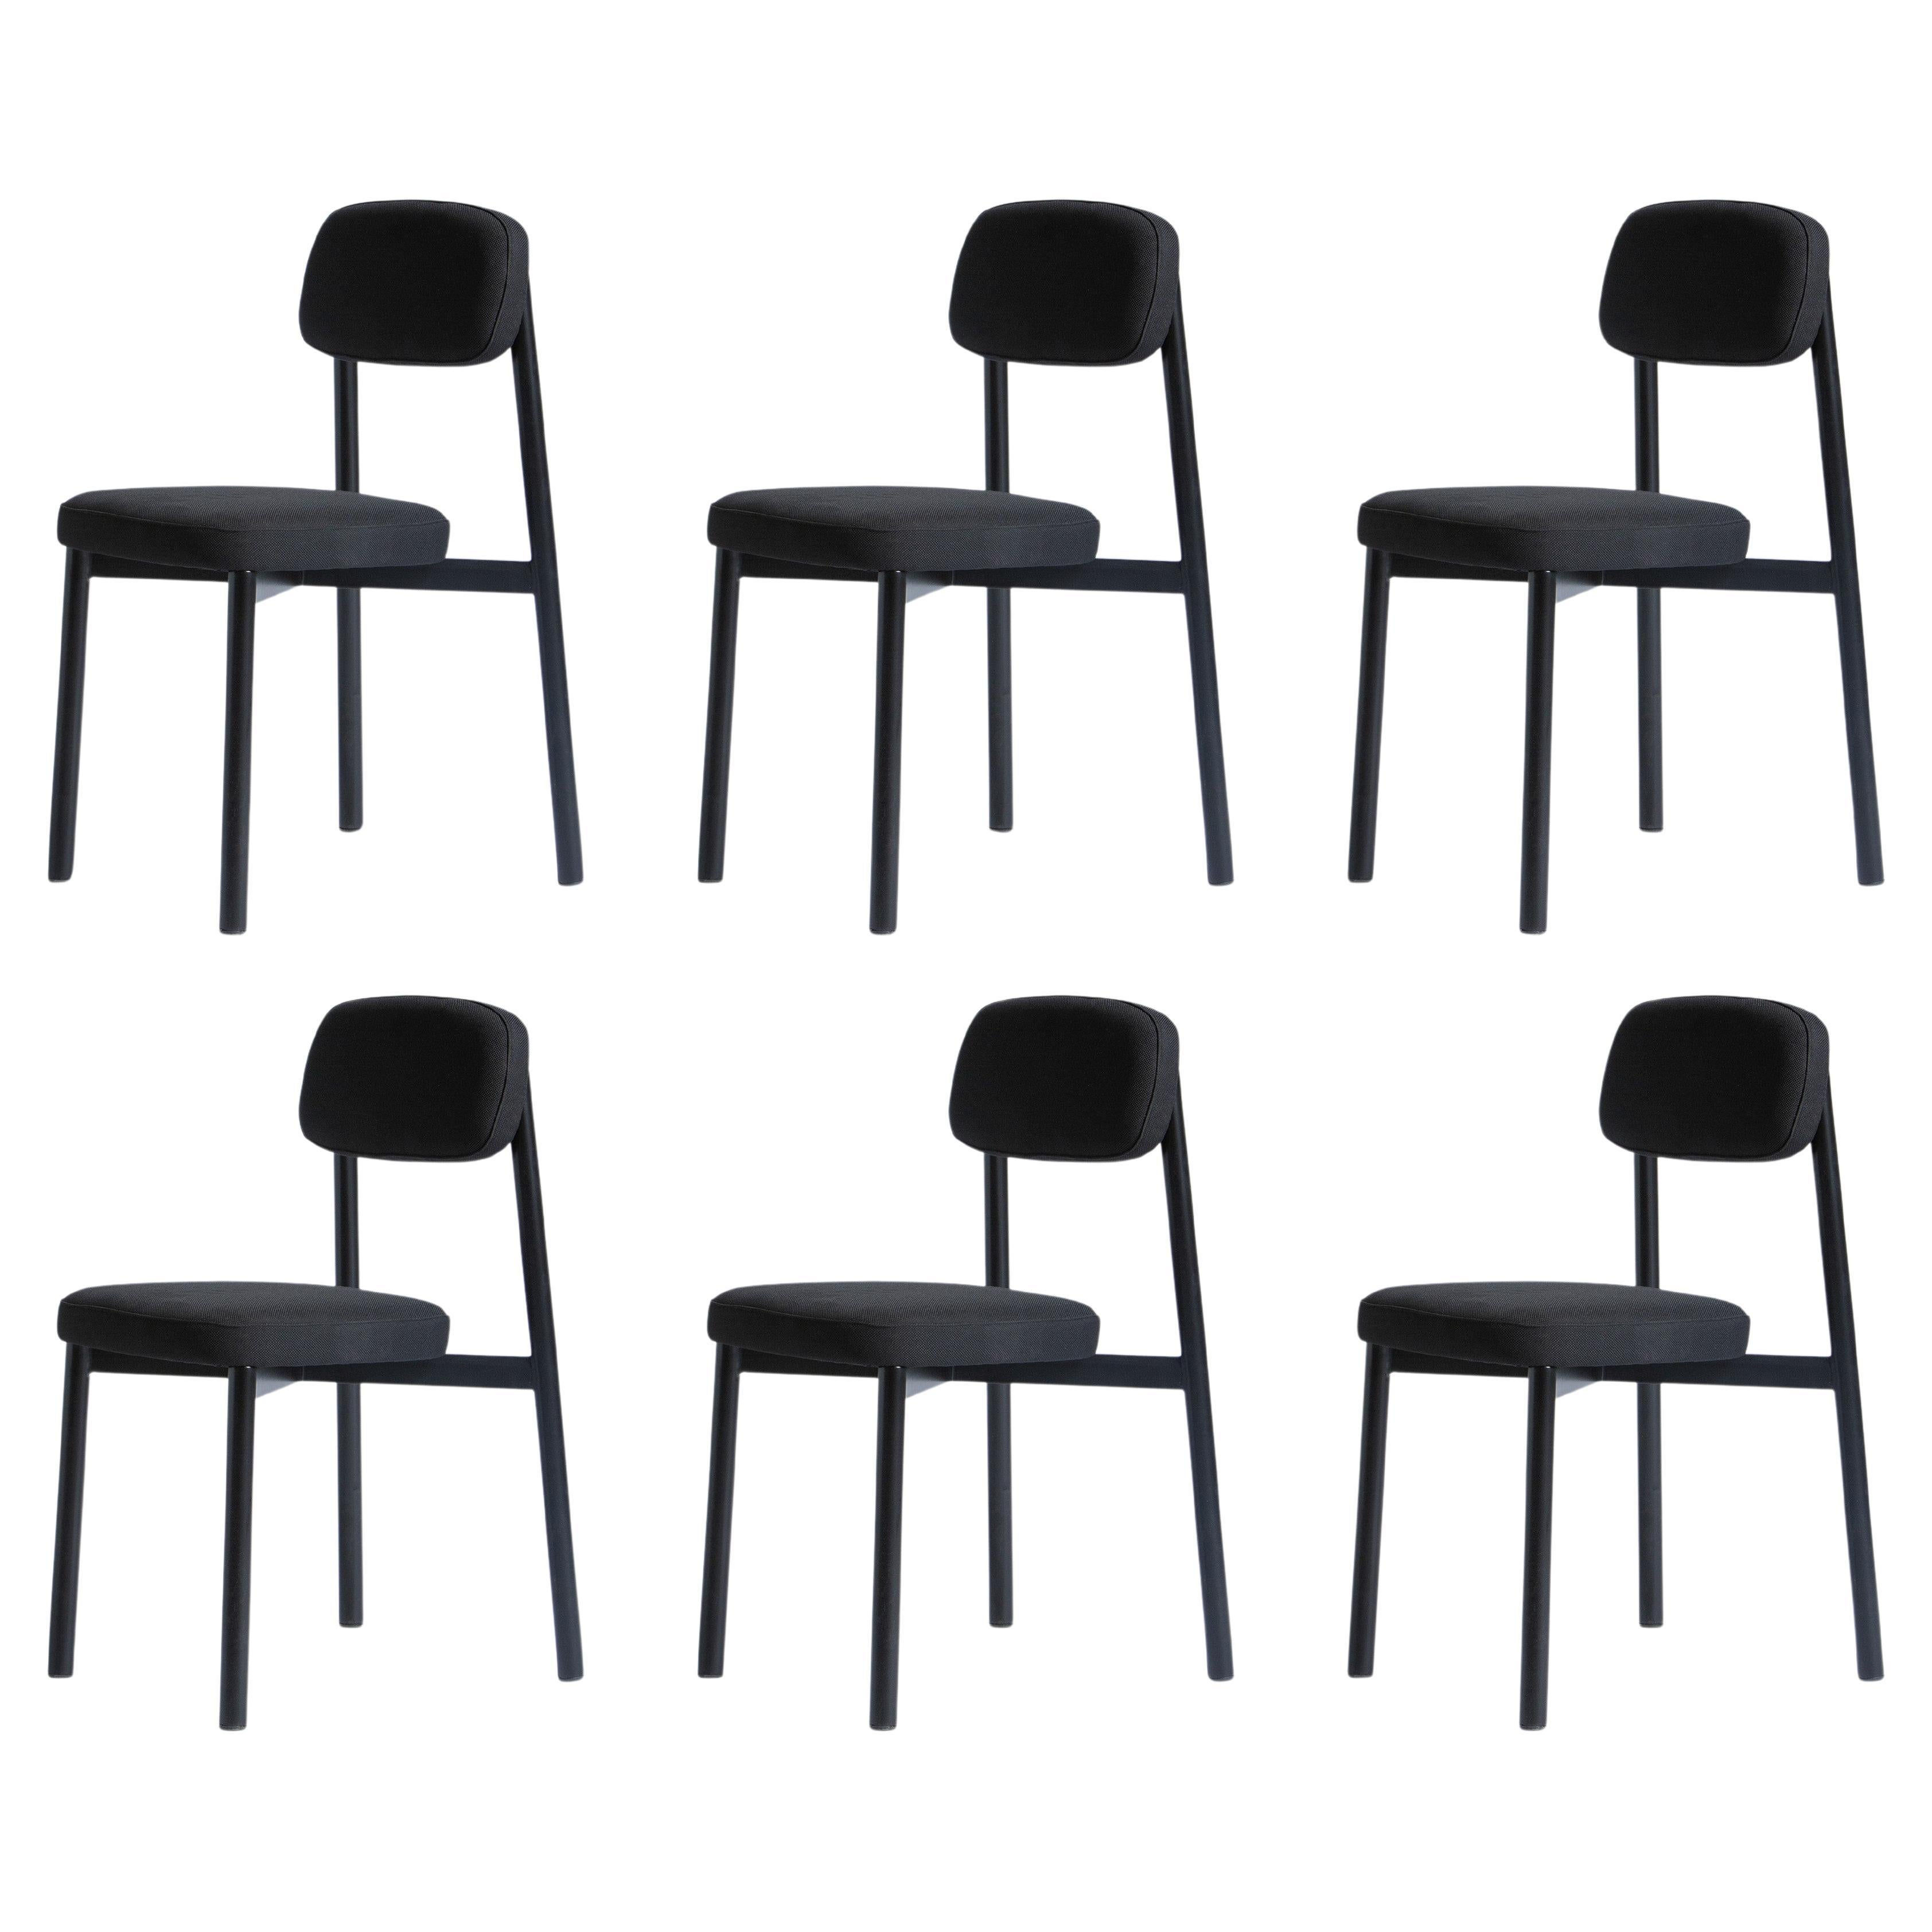 Set of 6 Black Residence Chairs by Kann Design For Sale